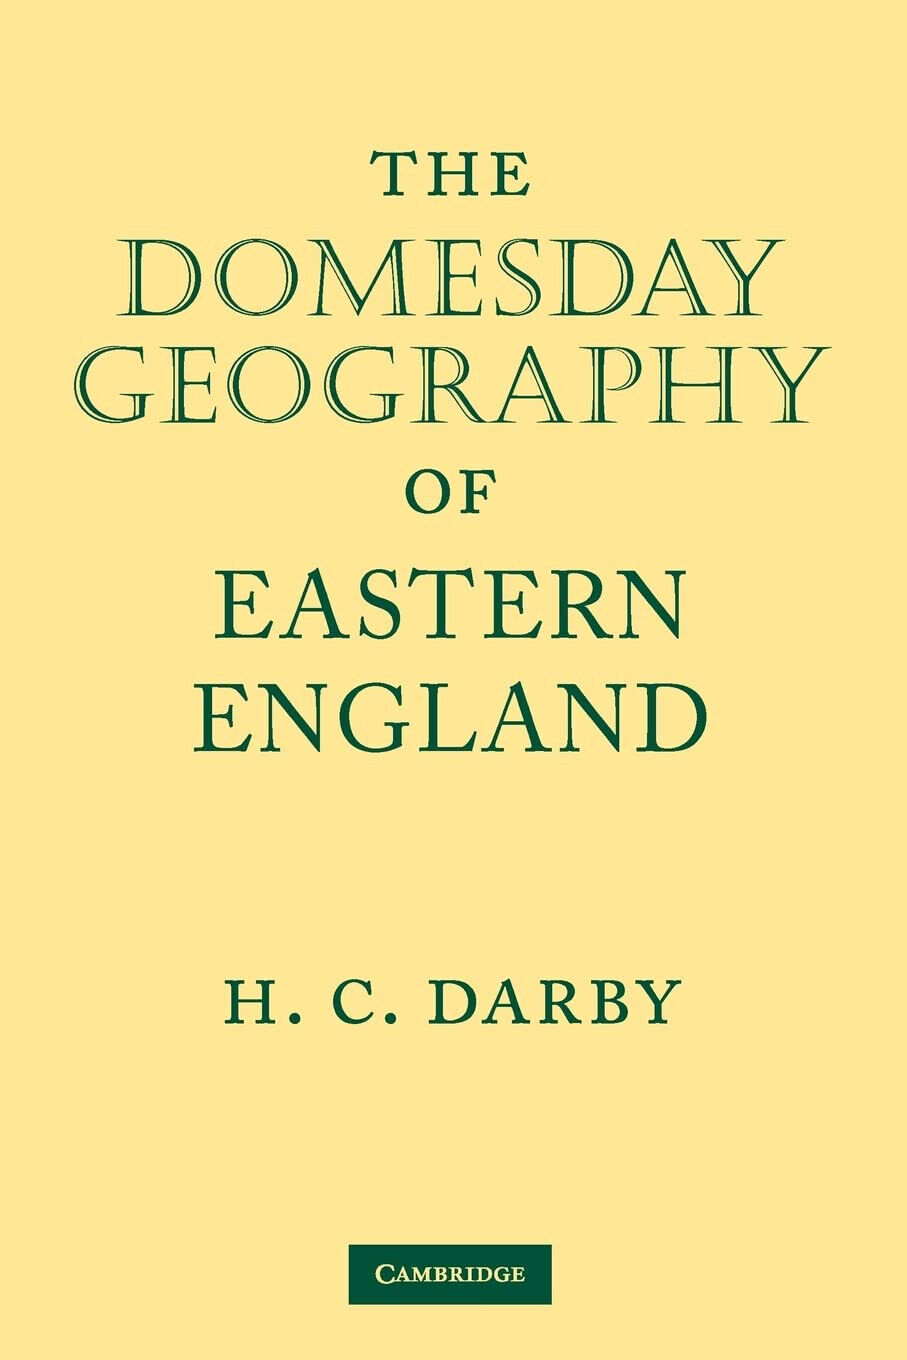 The Domesday Geography of Eastern England - H. C. Darby - Cambridge, 2022 libro usato